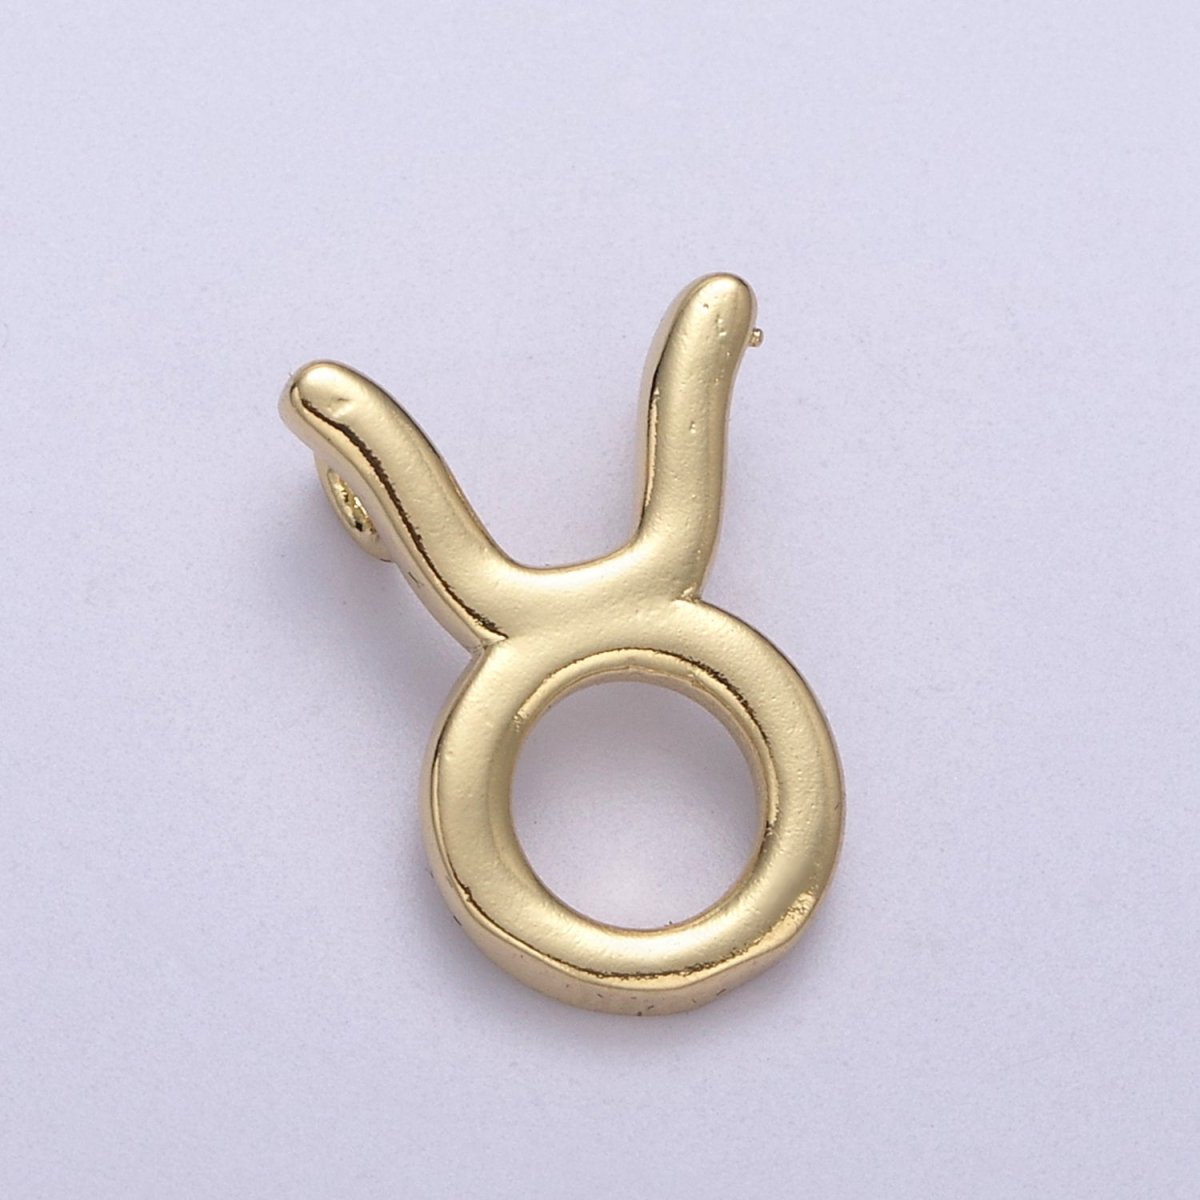 Small Zodiac Charms 14k gold Filled Astrological Zodiac Signs, Horoscope Symbols, Birthday, Astrology Charm for Bracelet Necklace Supply A-889-A-900 - DLUXCA